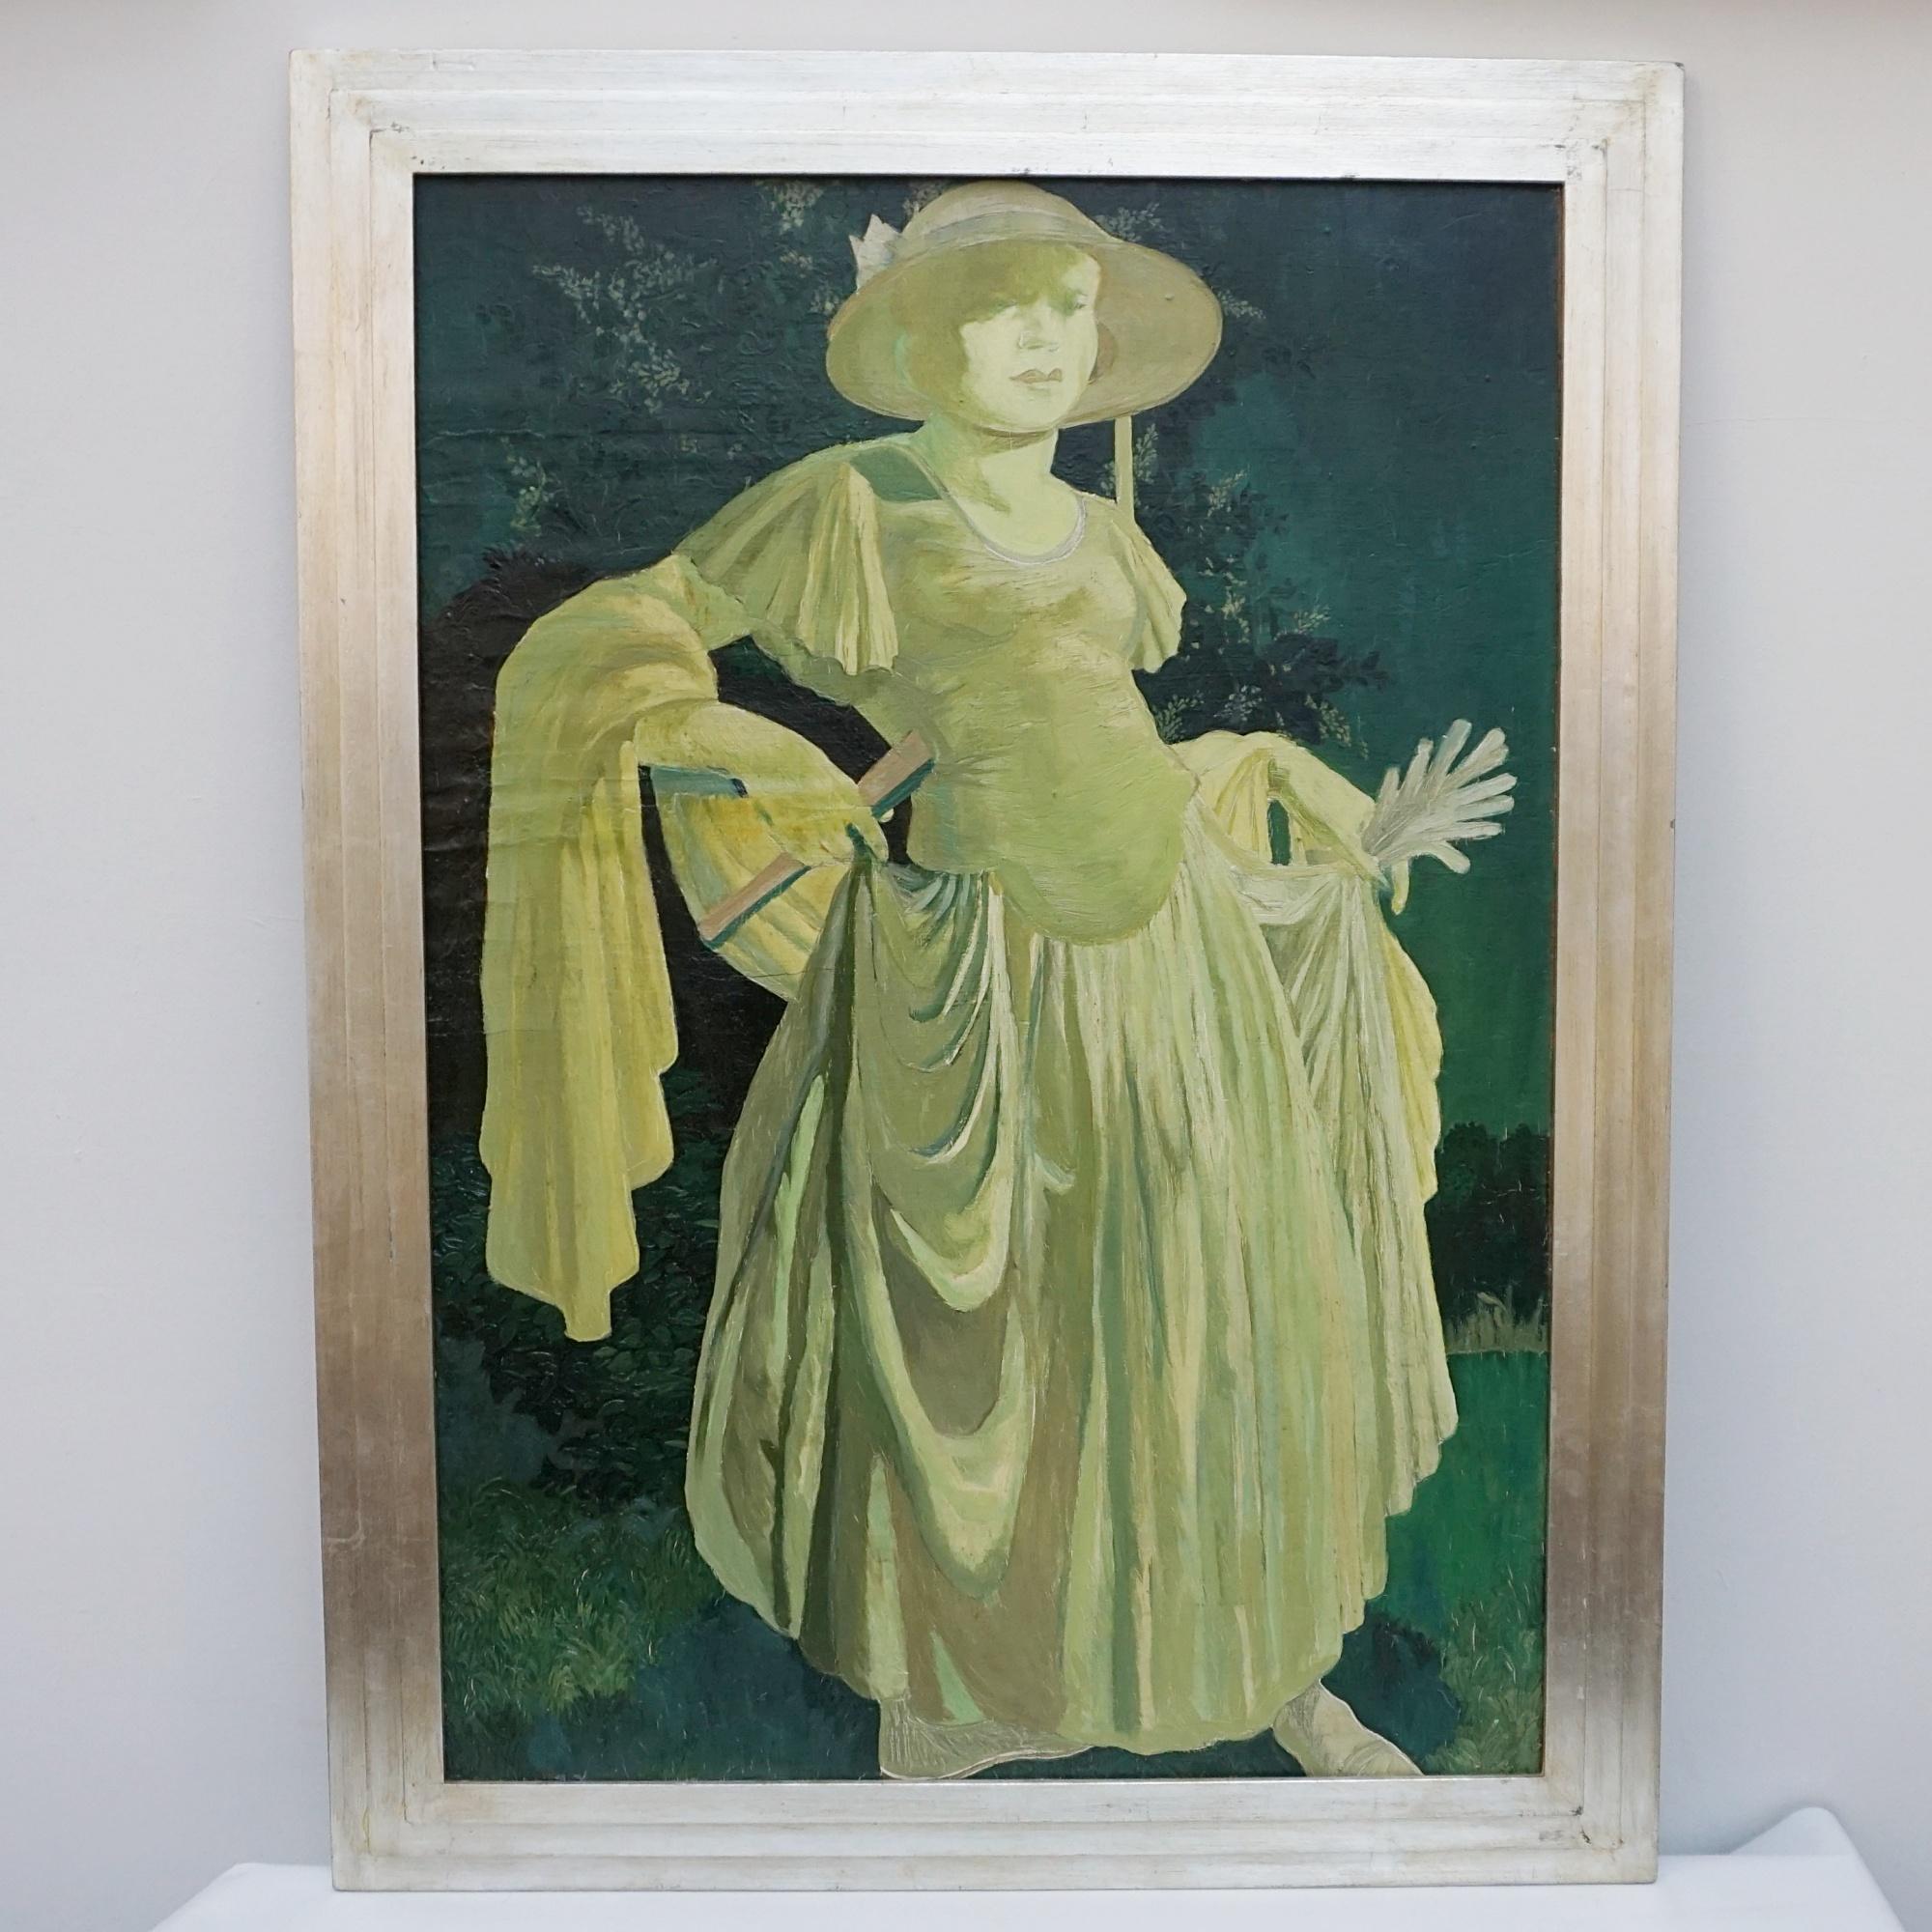 'A Moonlit Vision'. An oil on board painting by the circle of Marcel Delmotte. Depicting a maiden holding her fan. Set against a silvered Art Deco frame. 

Dimensions: H 100.3cm W 70.5cm

Origin: Belgian

Date: Circa 1930

Item Number: 0112232